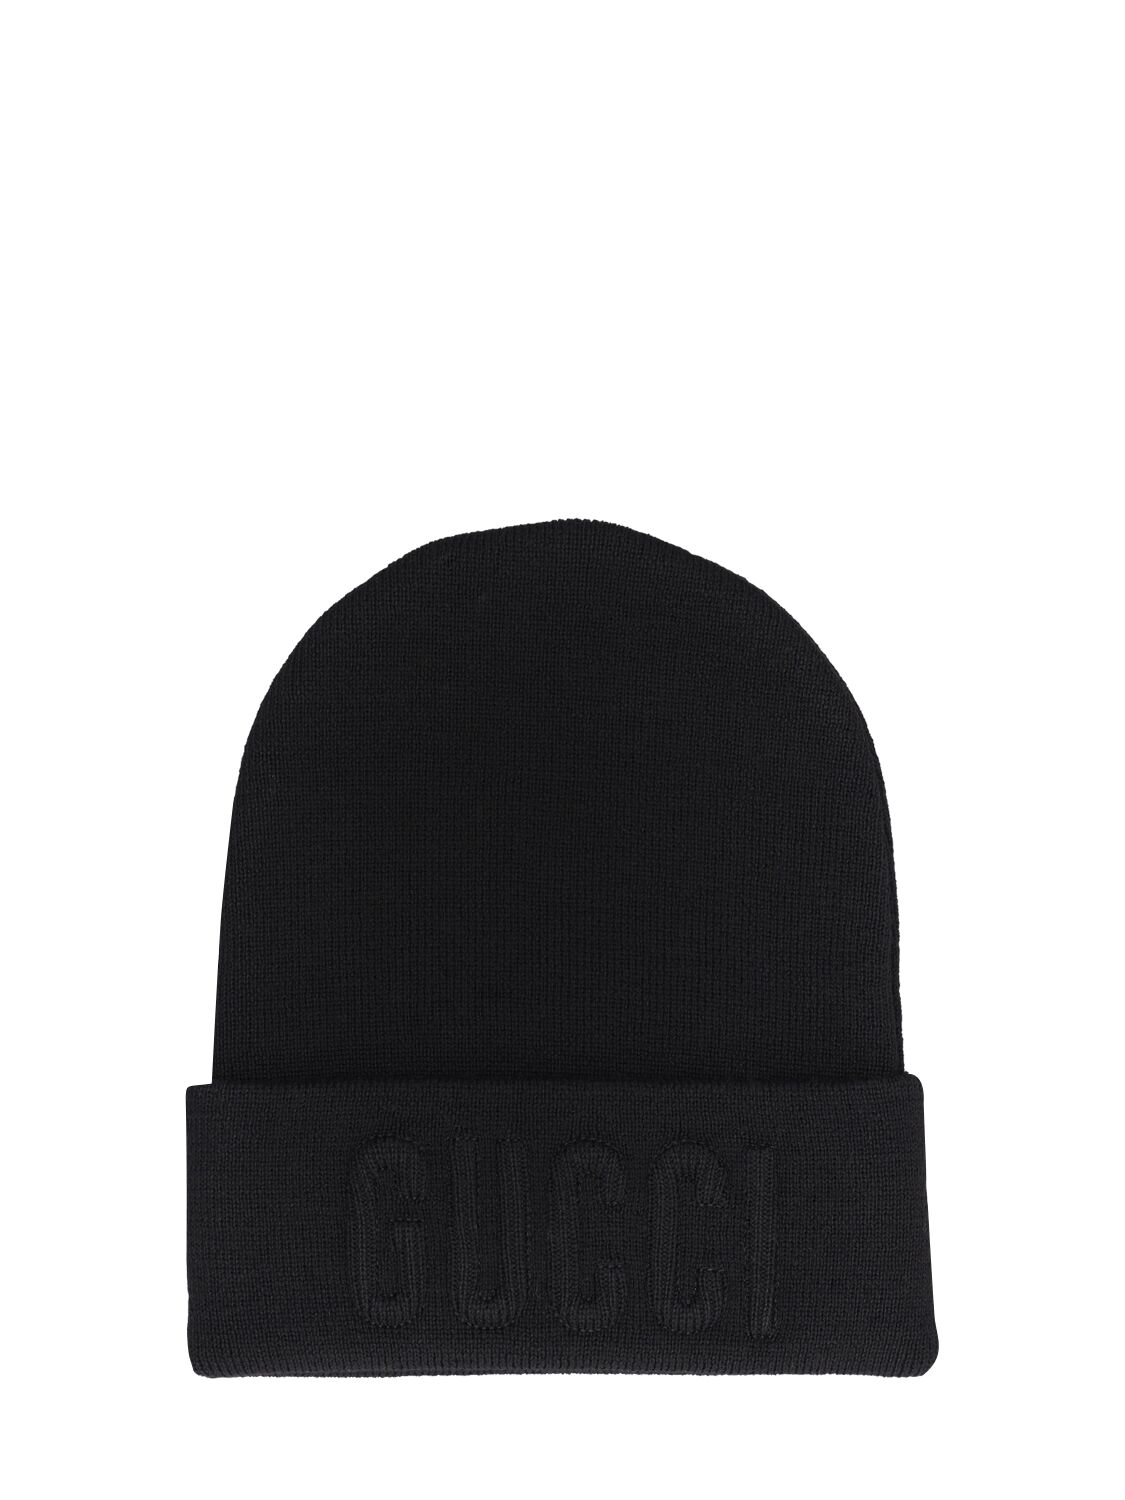 Image of Embroidered Wool Knit Beanie